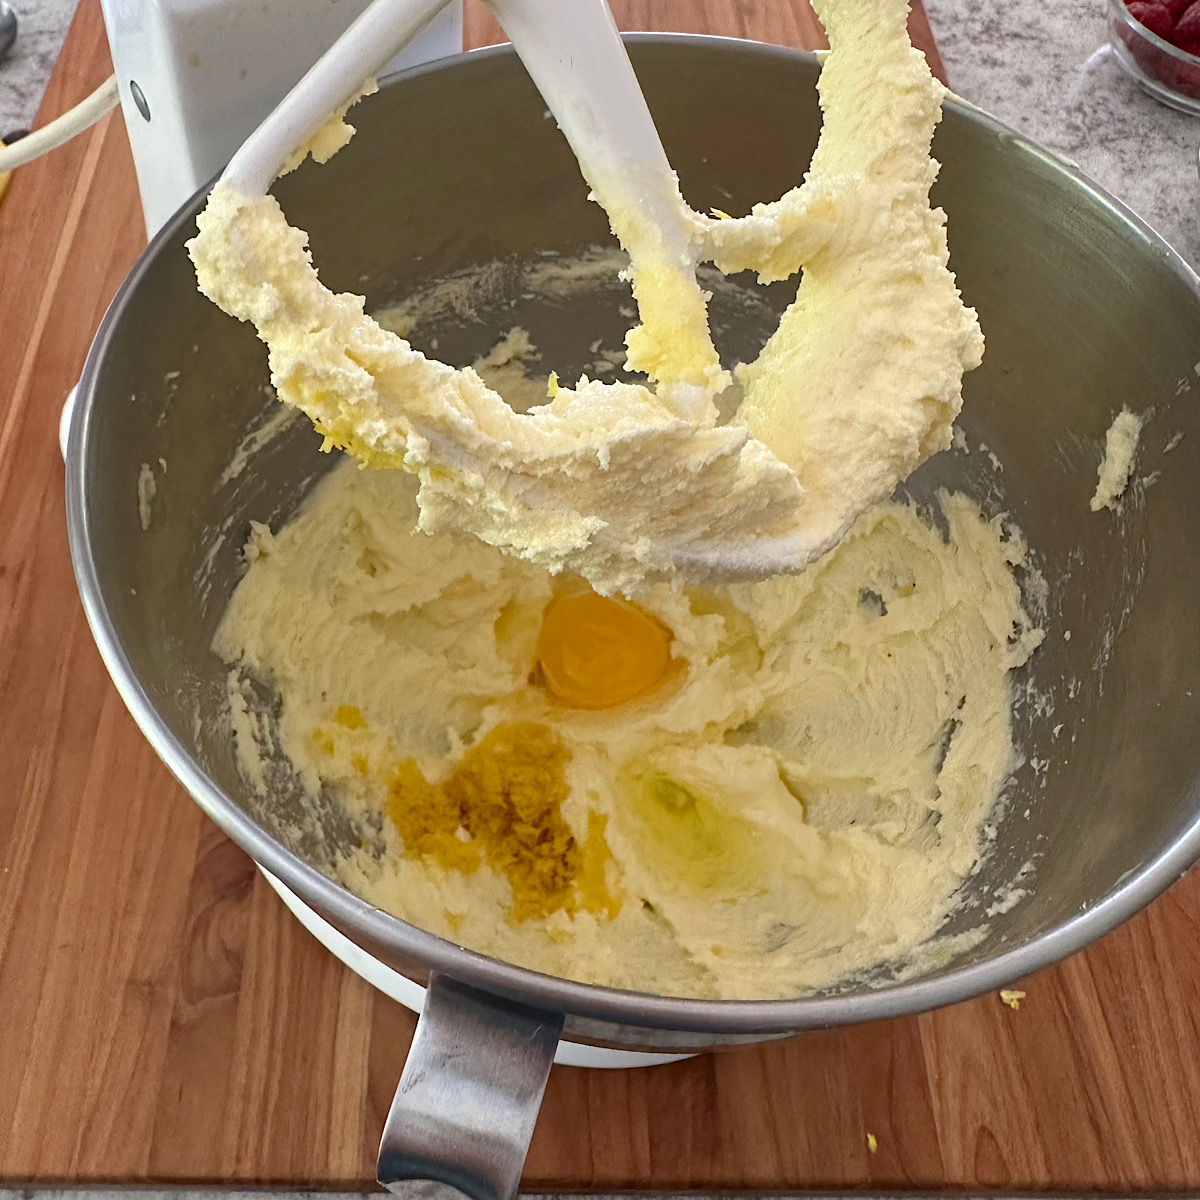 Butter, sugar and egg in a stand mixer.